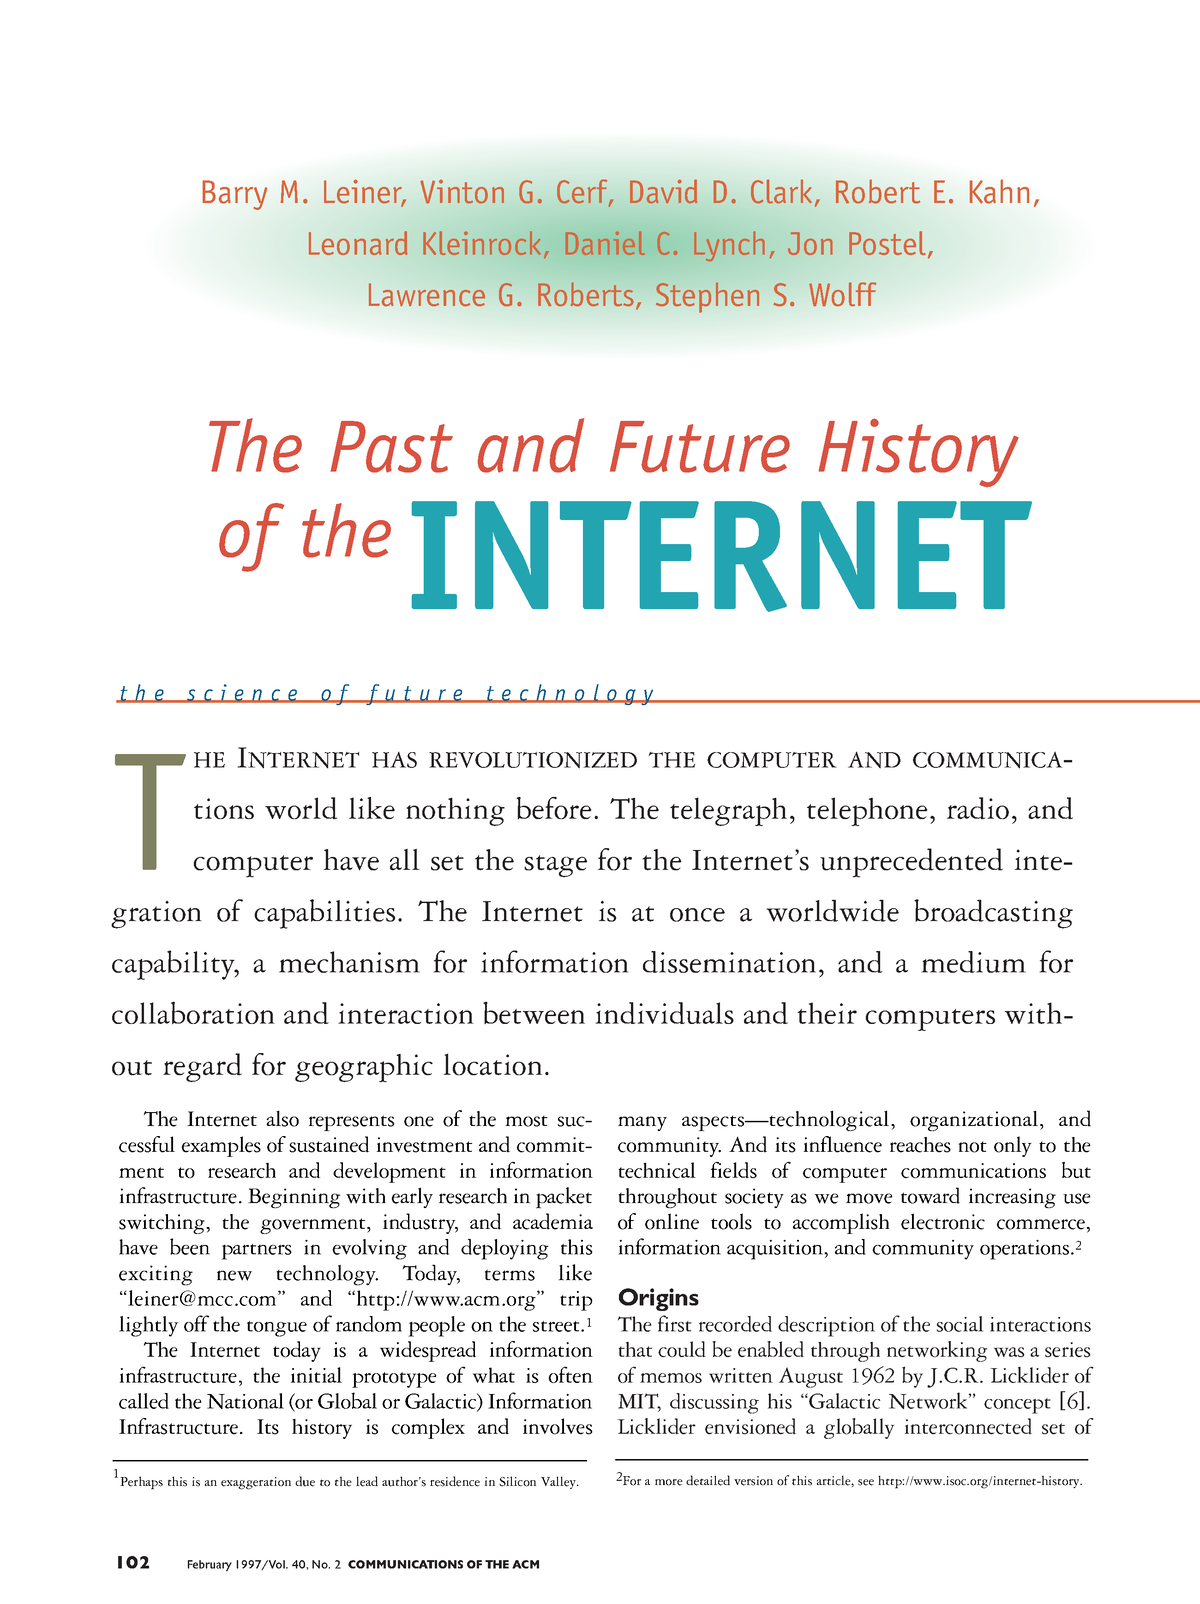 history of internet assignment